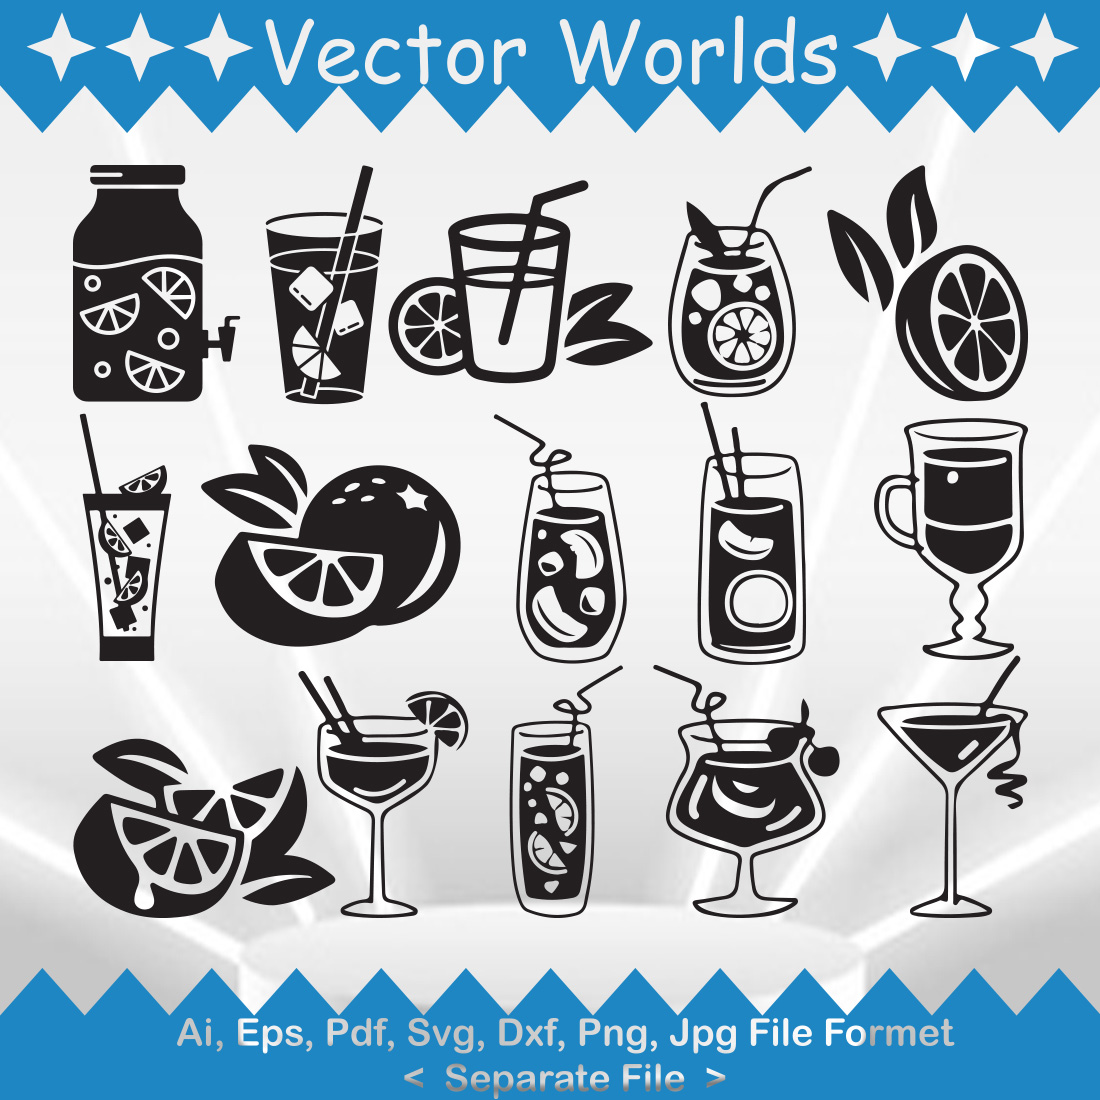 Bundle of vector enchanting images of silhouettes of lemonades.